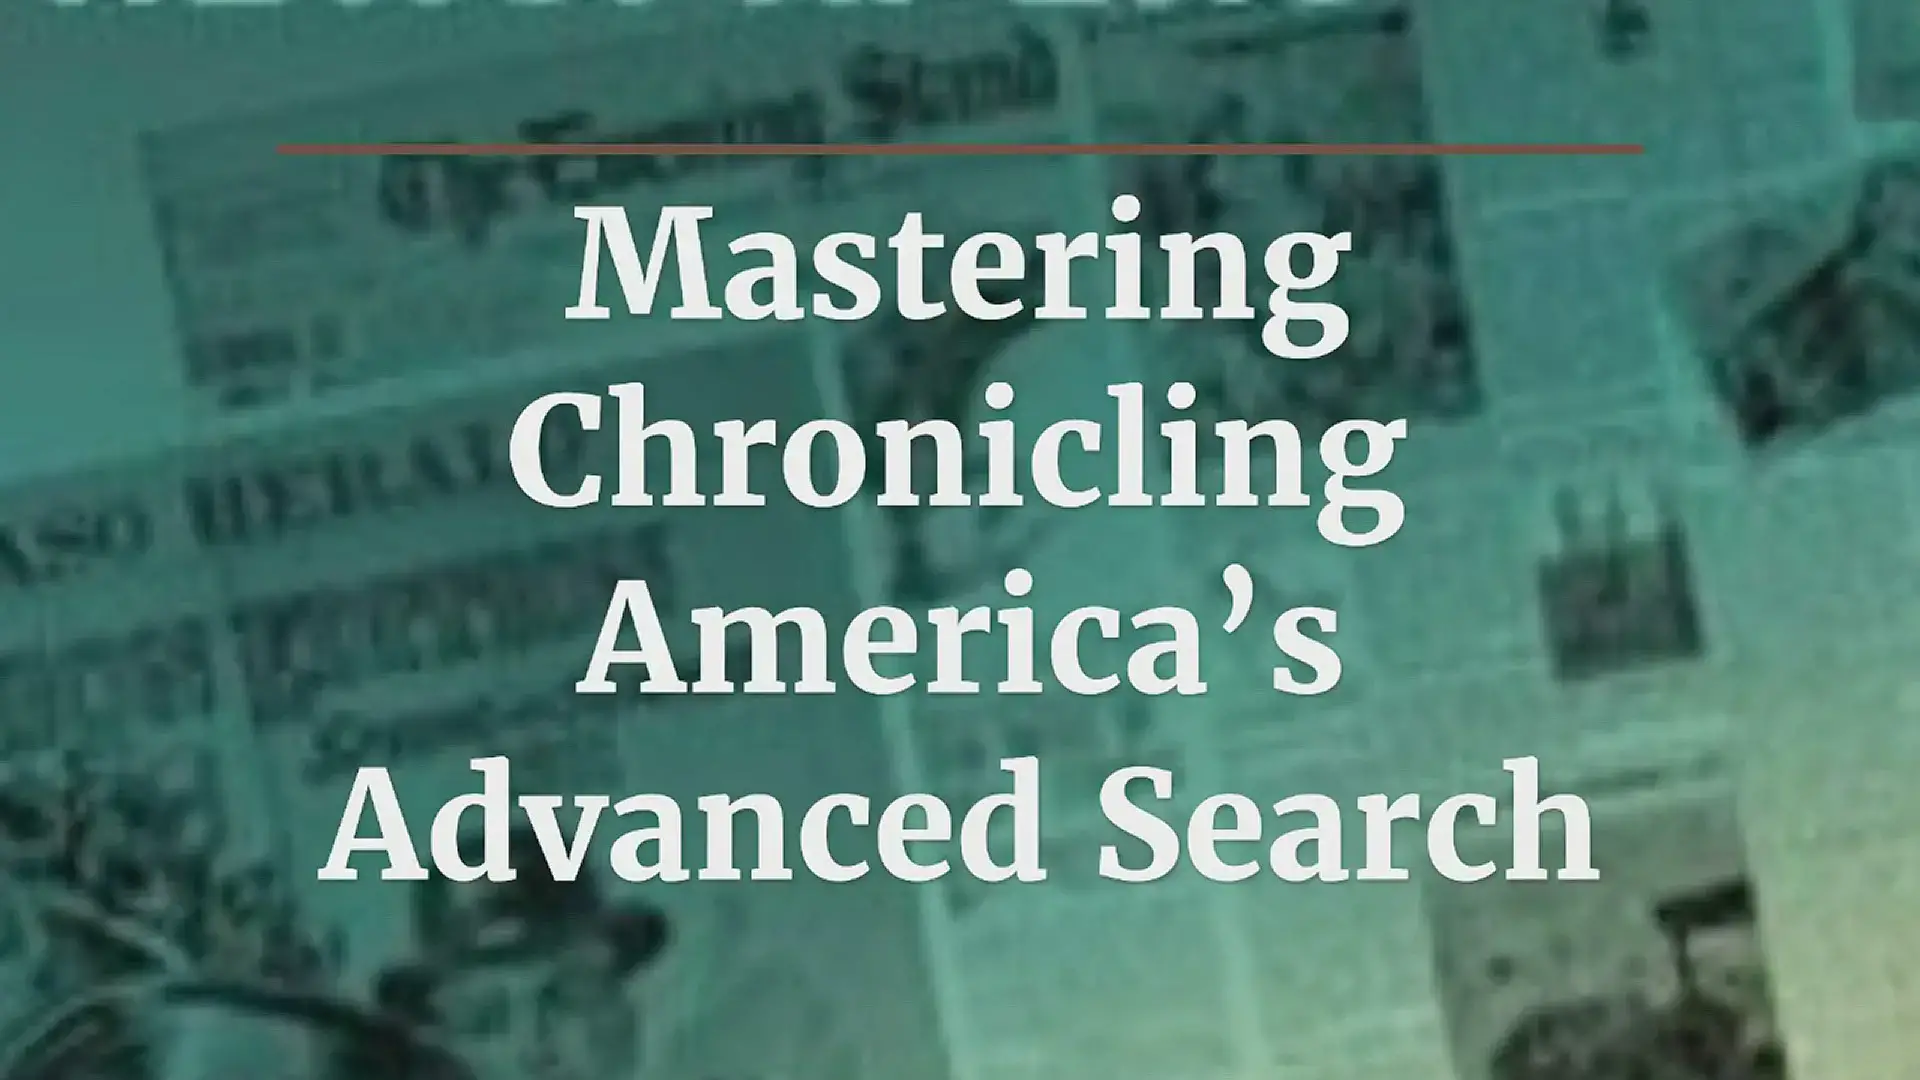 'Video thumbnail for Mastering Chronicling America’s Advanced Search'